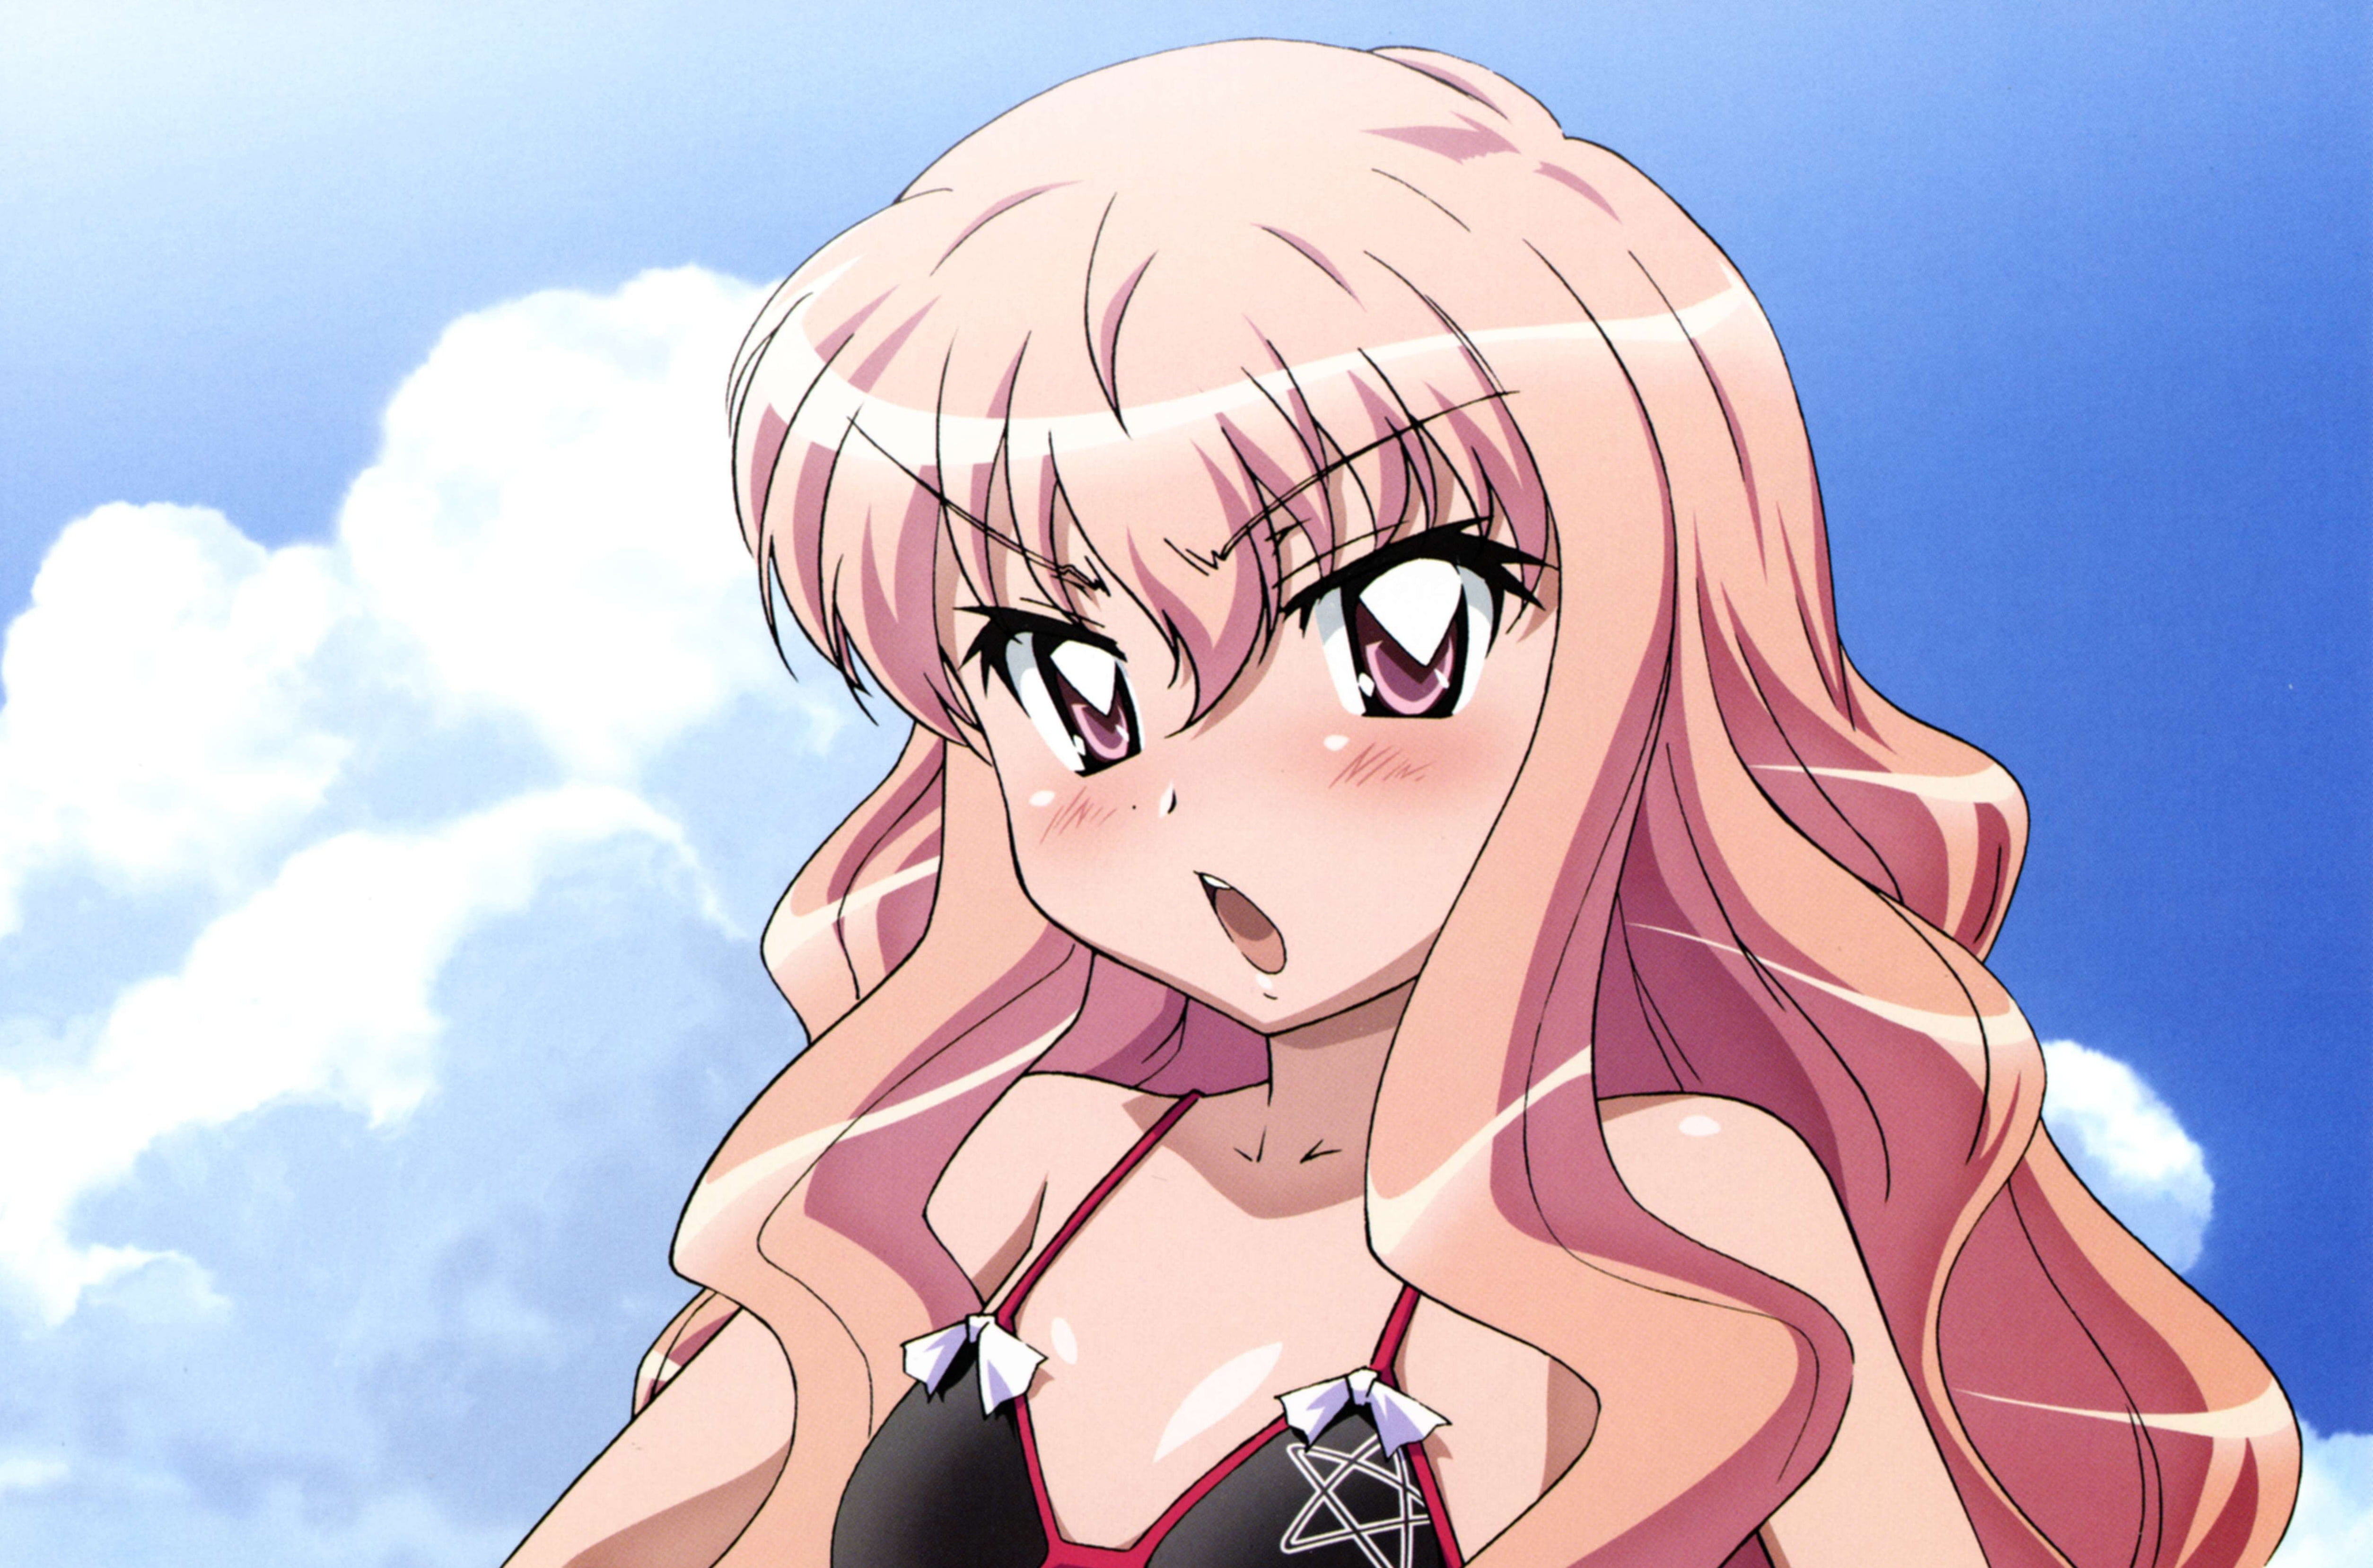 4 Tsundere Anime characters everybody loves (& 4 no one wants to see)